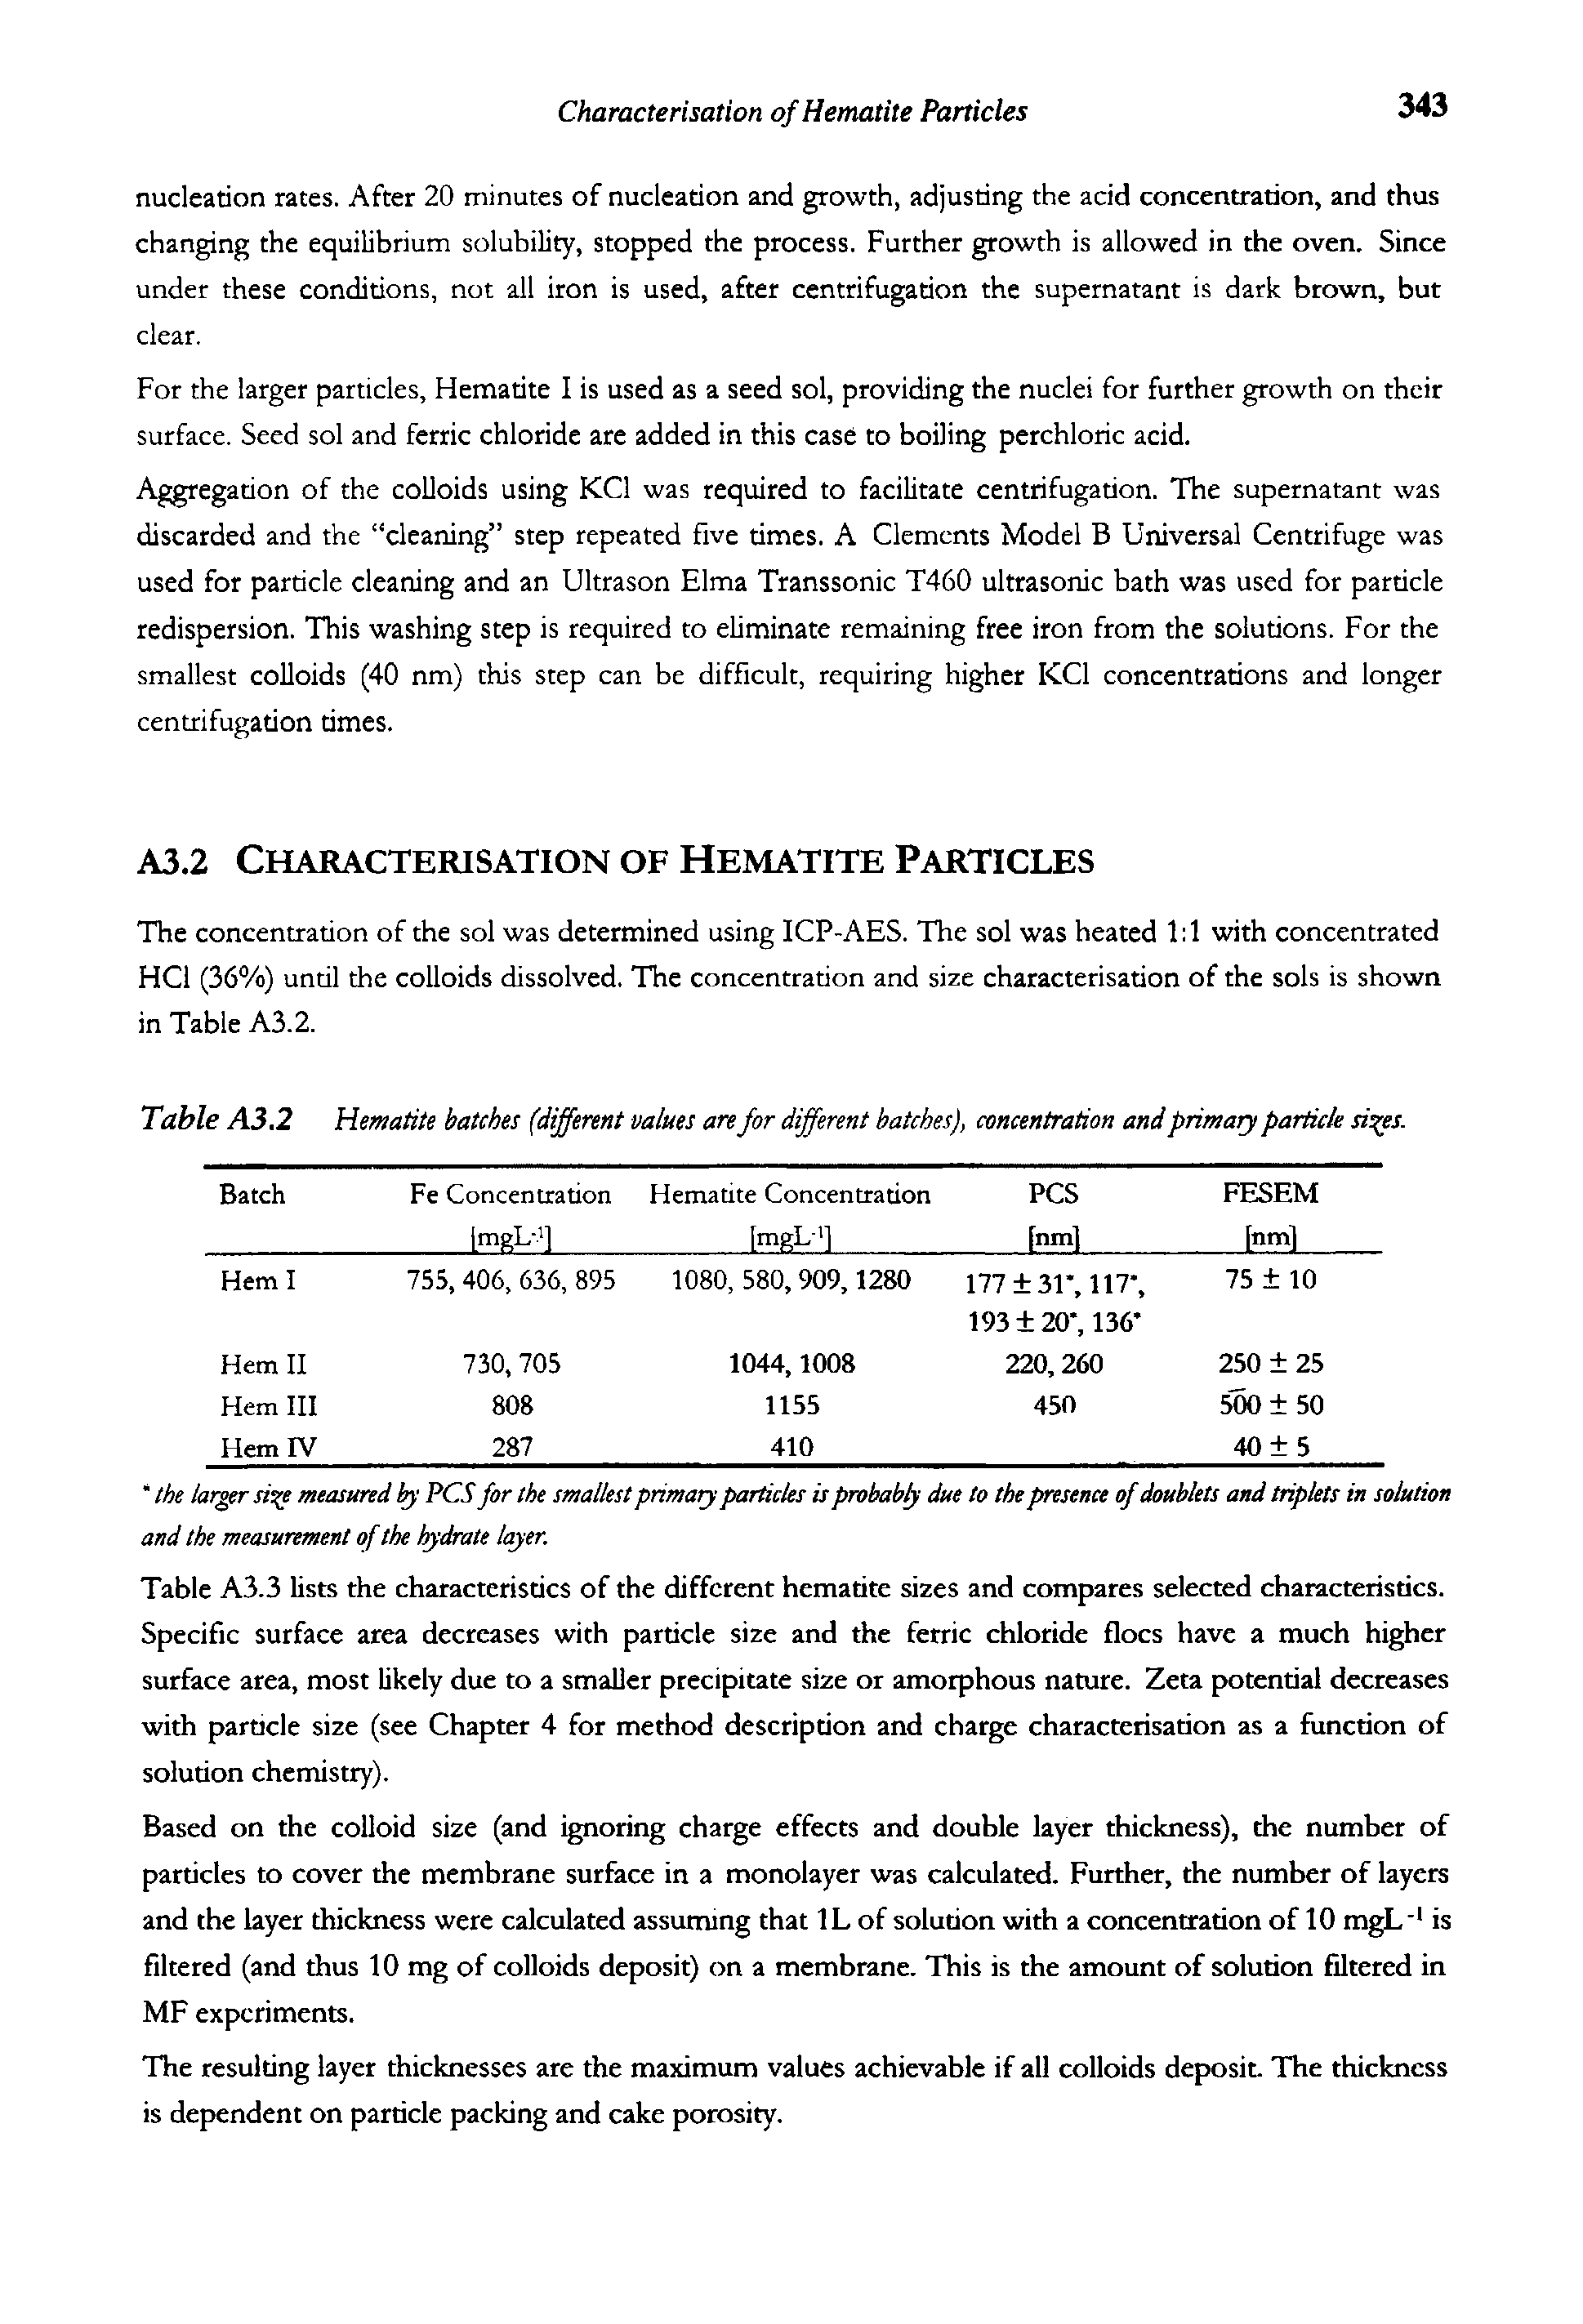 Table A3.3 lists the characteristics of the different hematite sizes and compares selected characteristics. Specific surface area decreases with particle size and the ferric chloride floes have a much higher surface area, most likely due to a smaller precipitate size or amorphous nature. Zeta potential decreases with particle size (see Chapter 4 for method description and charge characterisation as a function of solution chemistry).